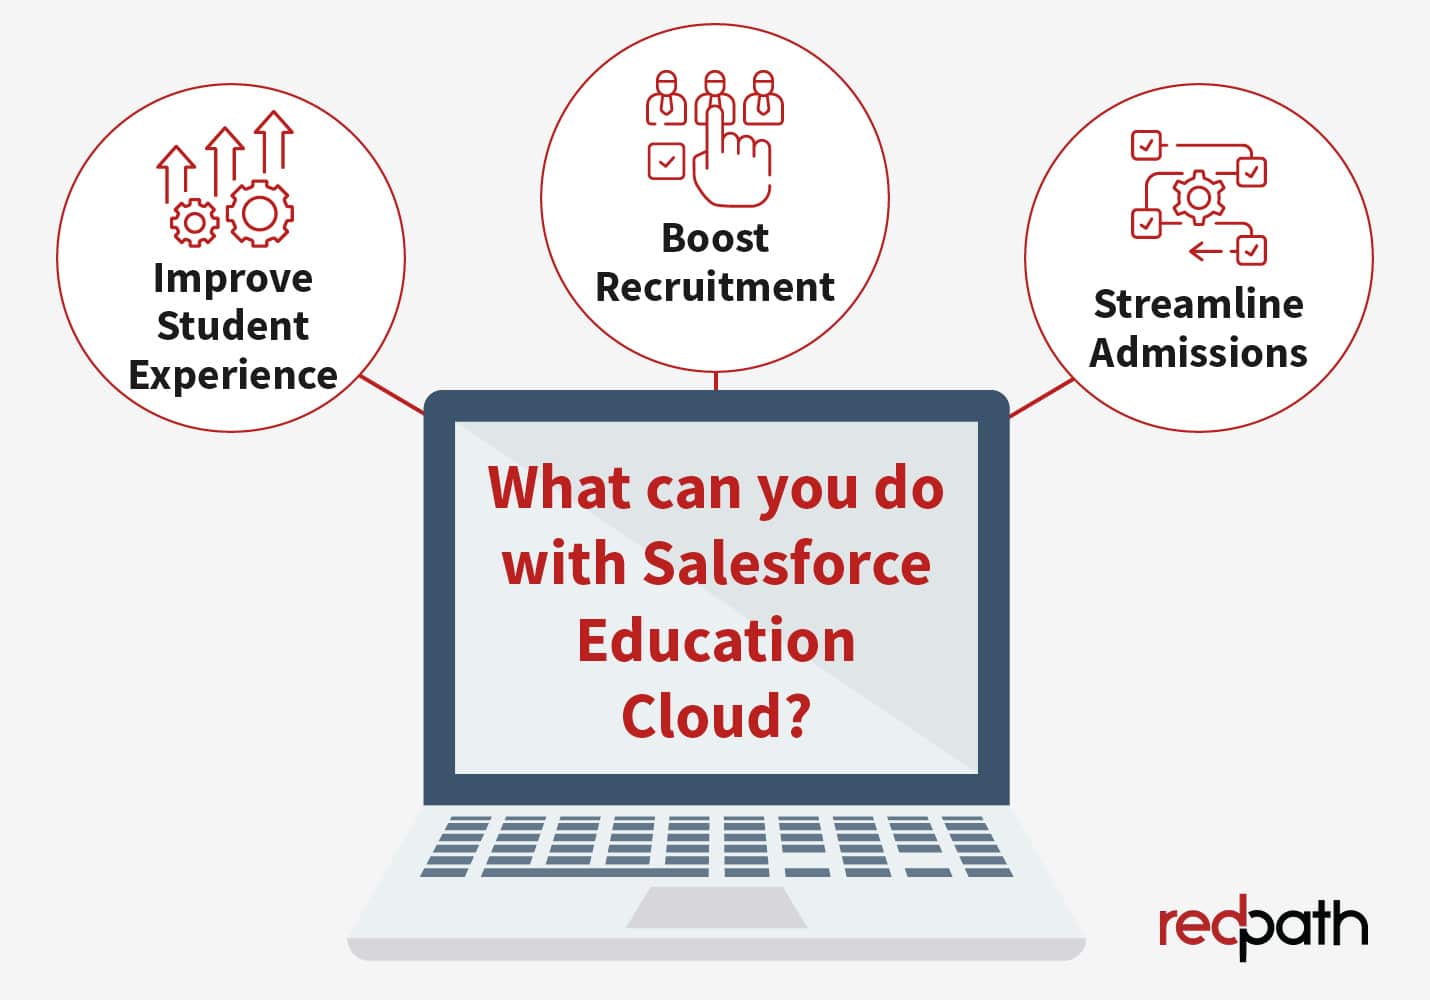 This image and the text below explain the main ways schools can utilize Salesforce Education Cloud.